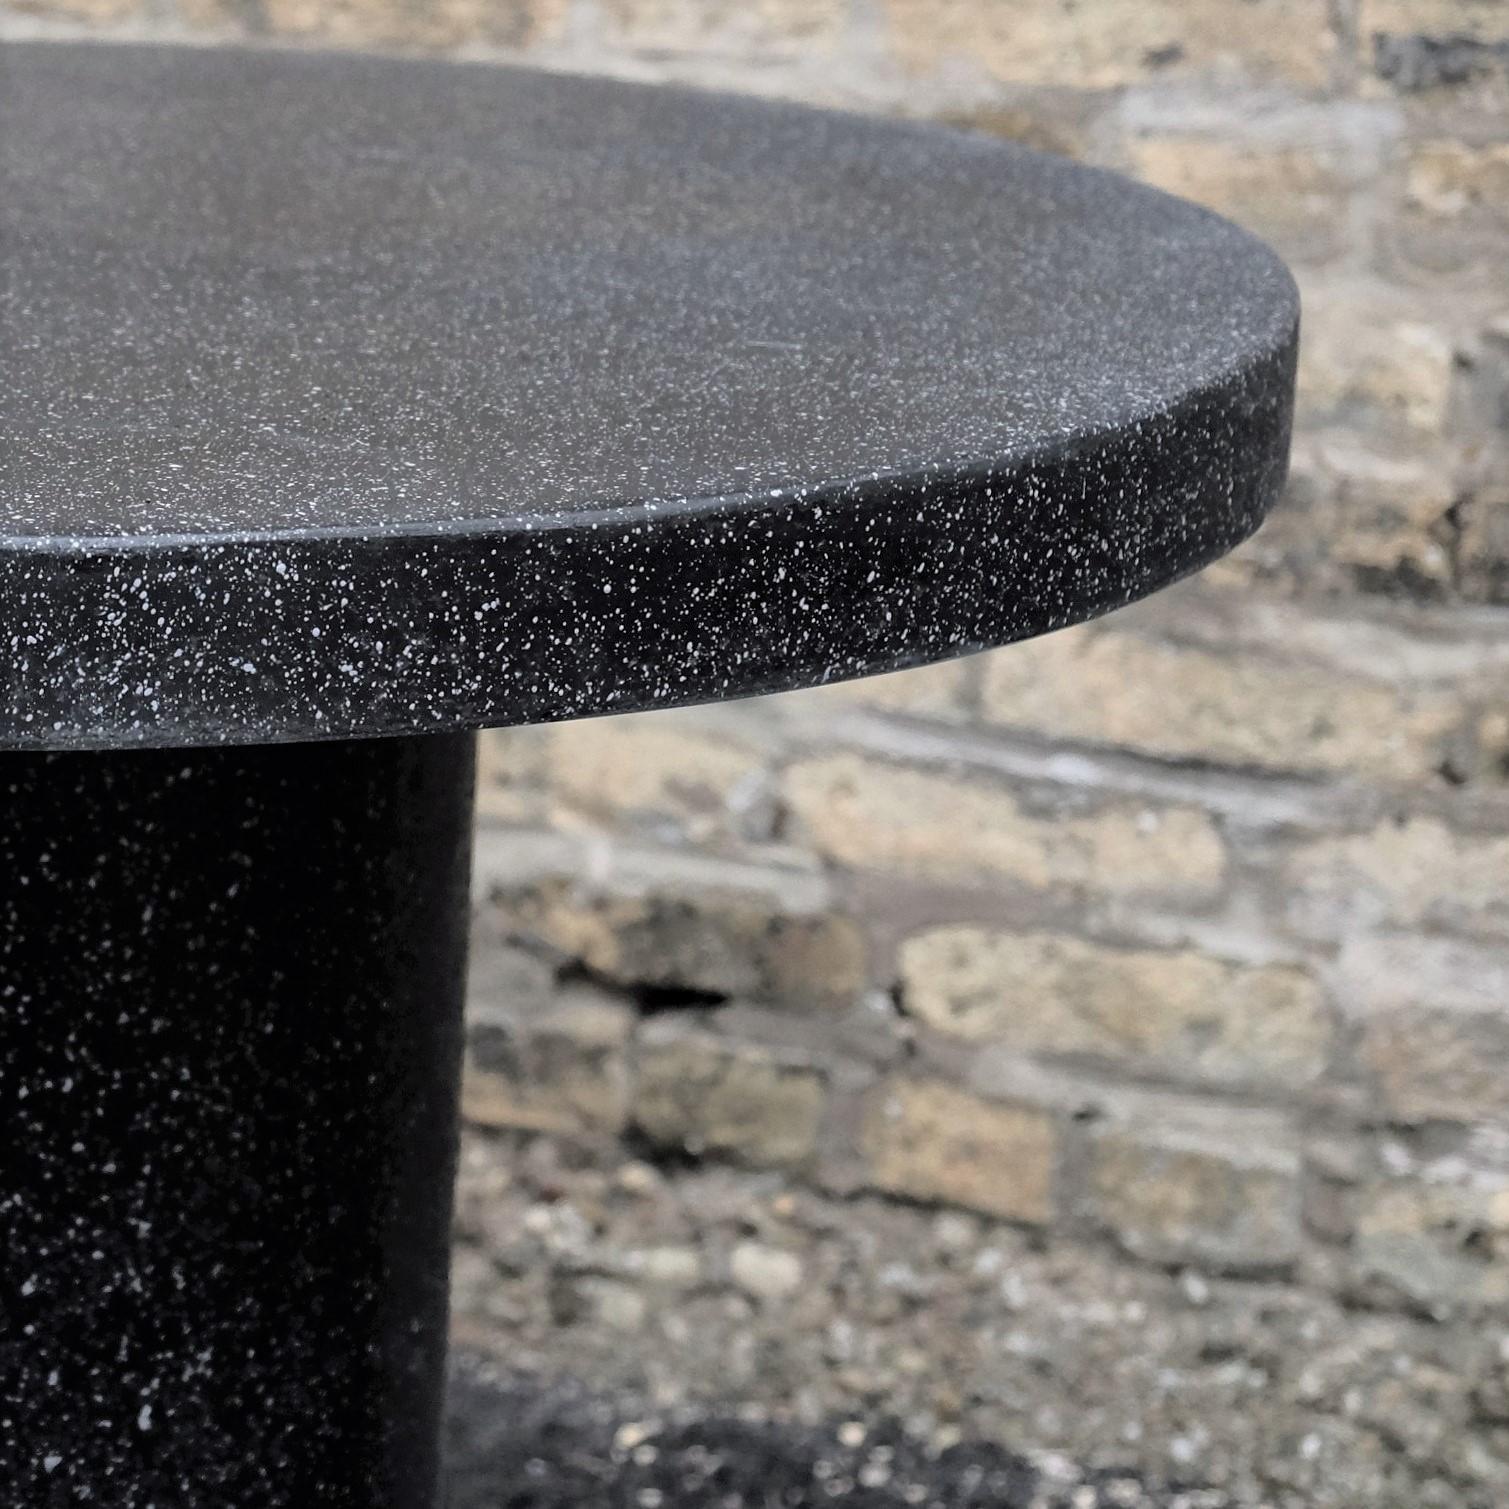 Minimalist Cast Resin 'Spring' Dining Table, Coal Stone Finish by Zachary A. Design For Sale